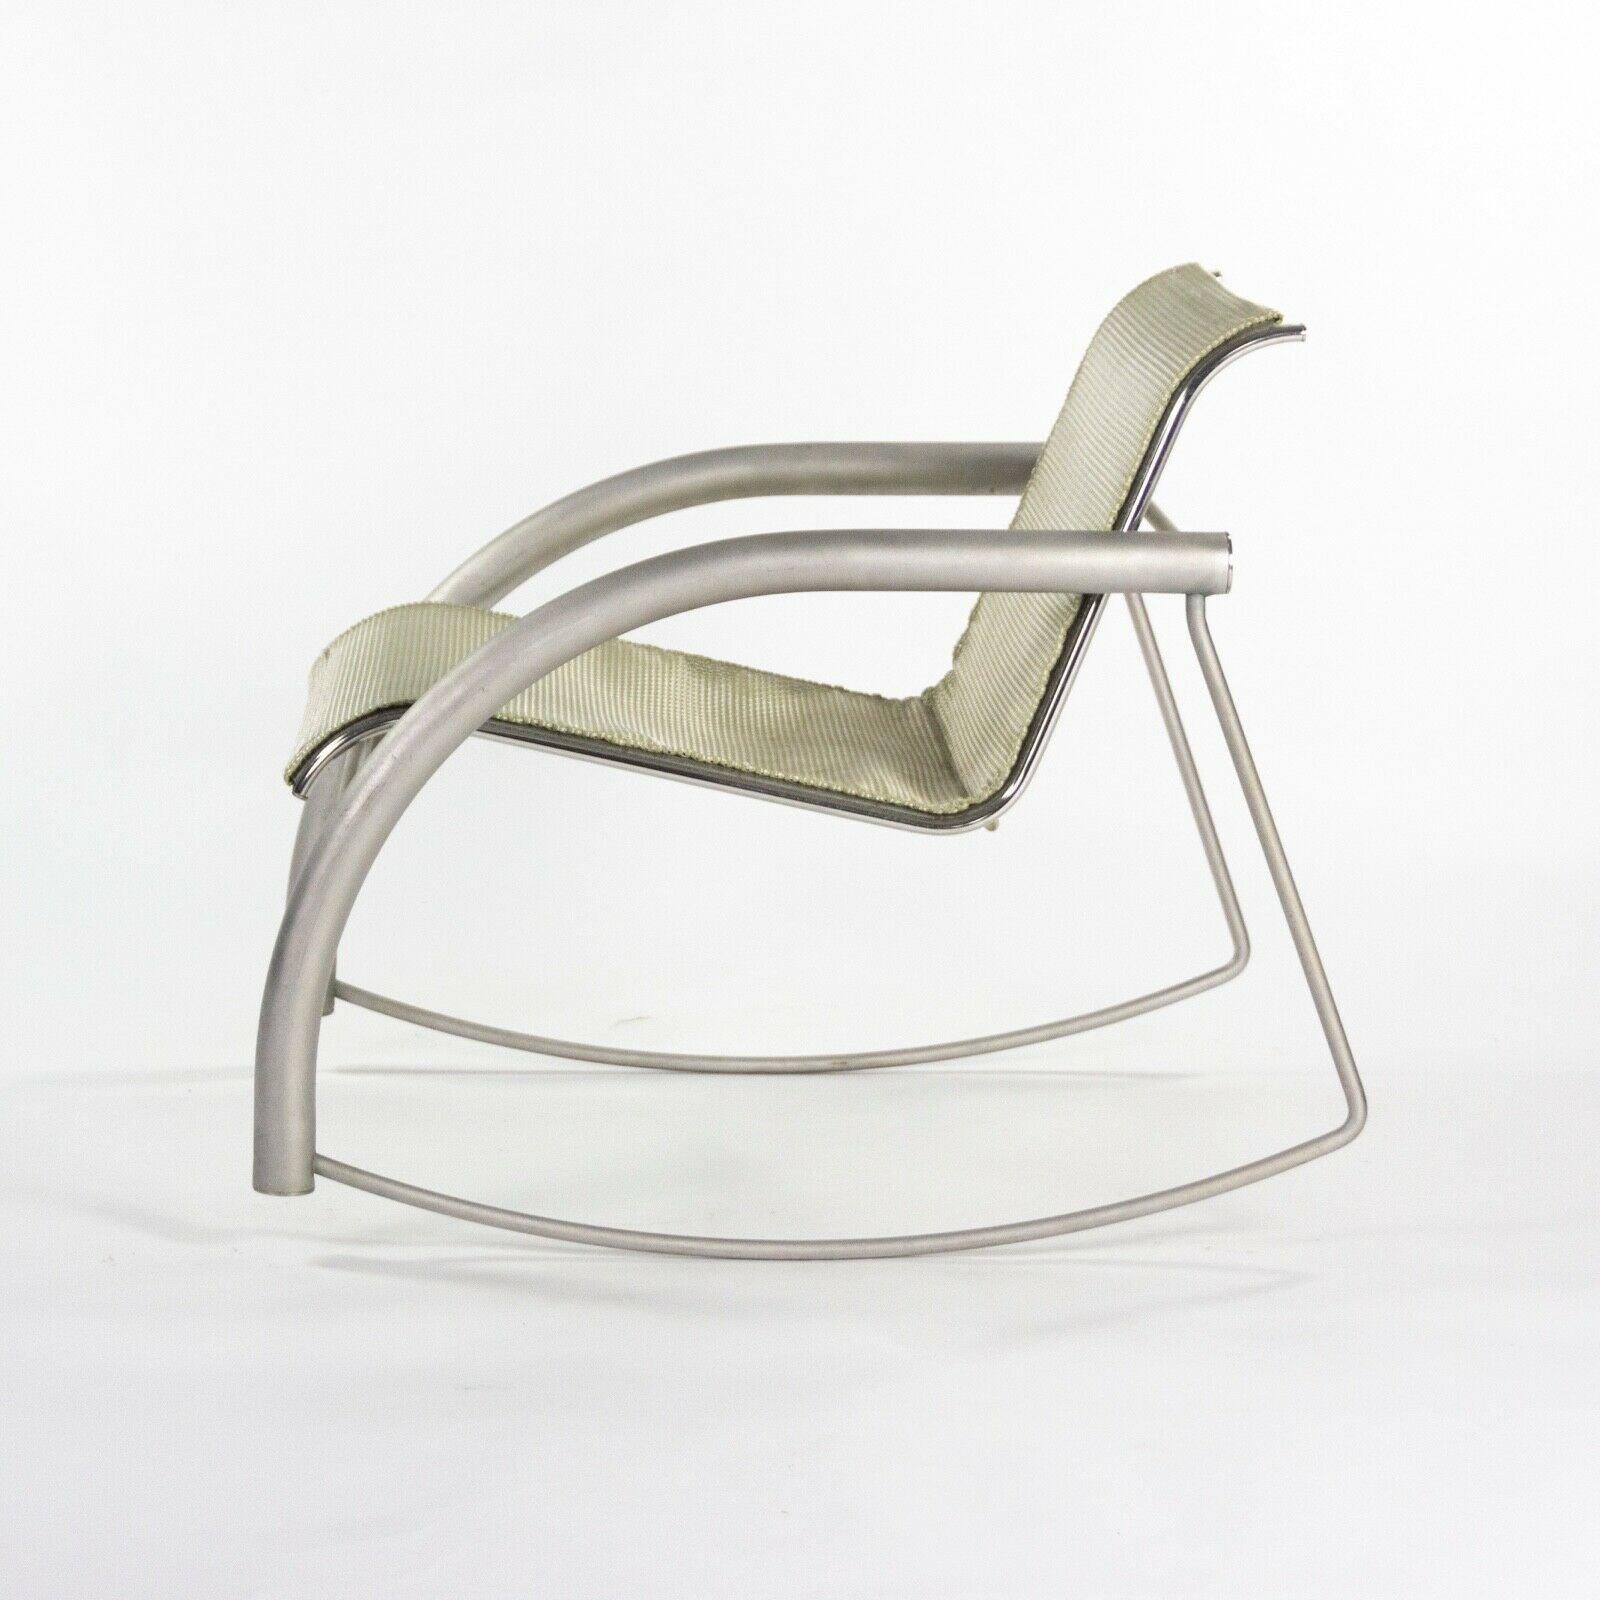 Prototype Richard Schultz 2002 Collection Stainless Steel & Mesh Rocking Chair For Sale 2